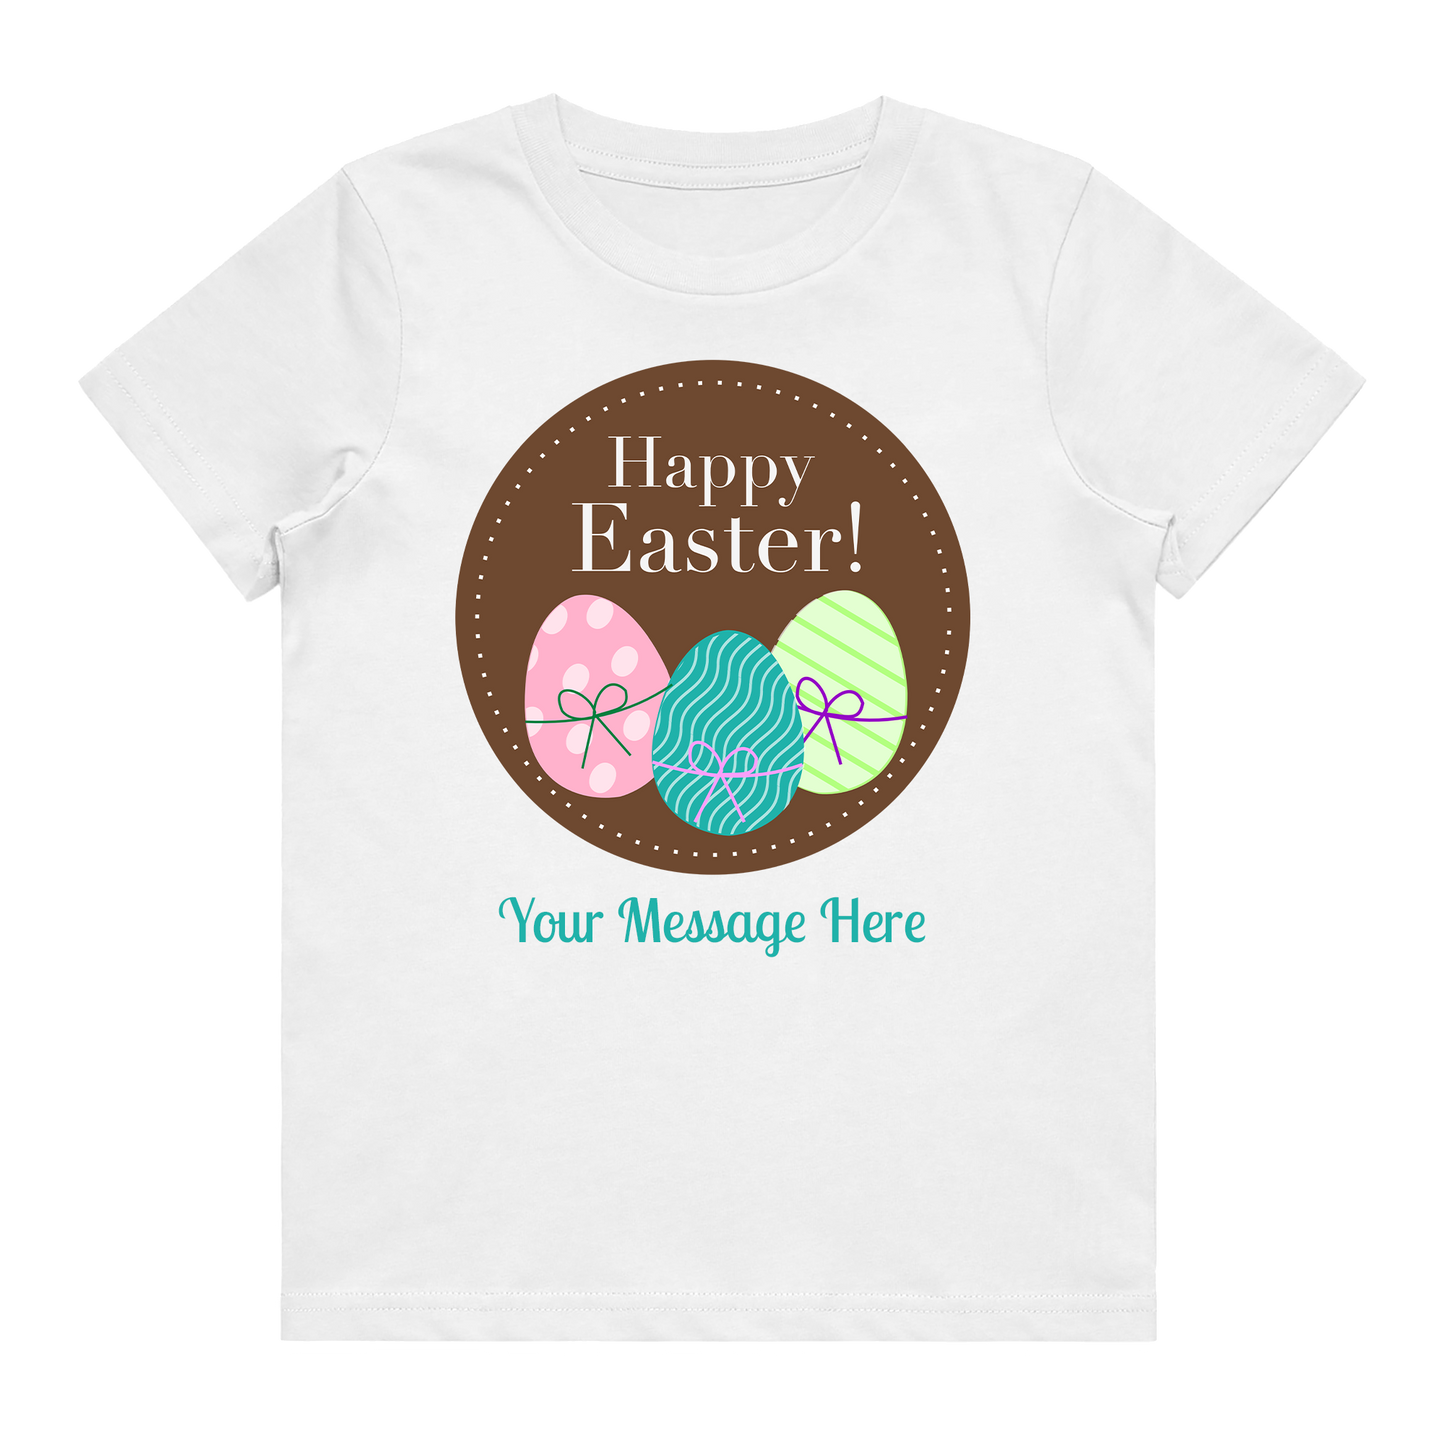 Kid's T-Shirt - Happy Easter